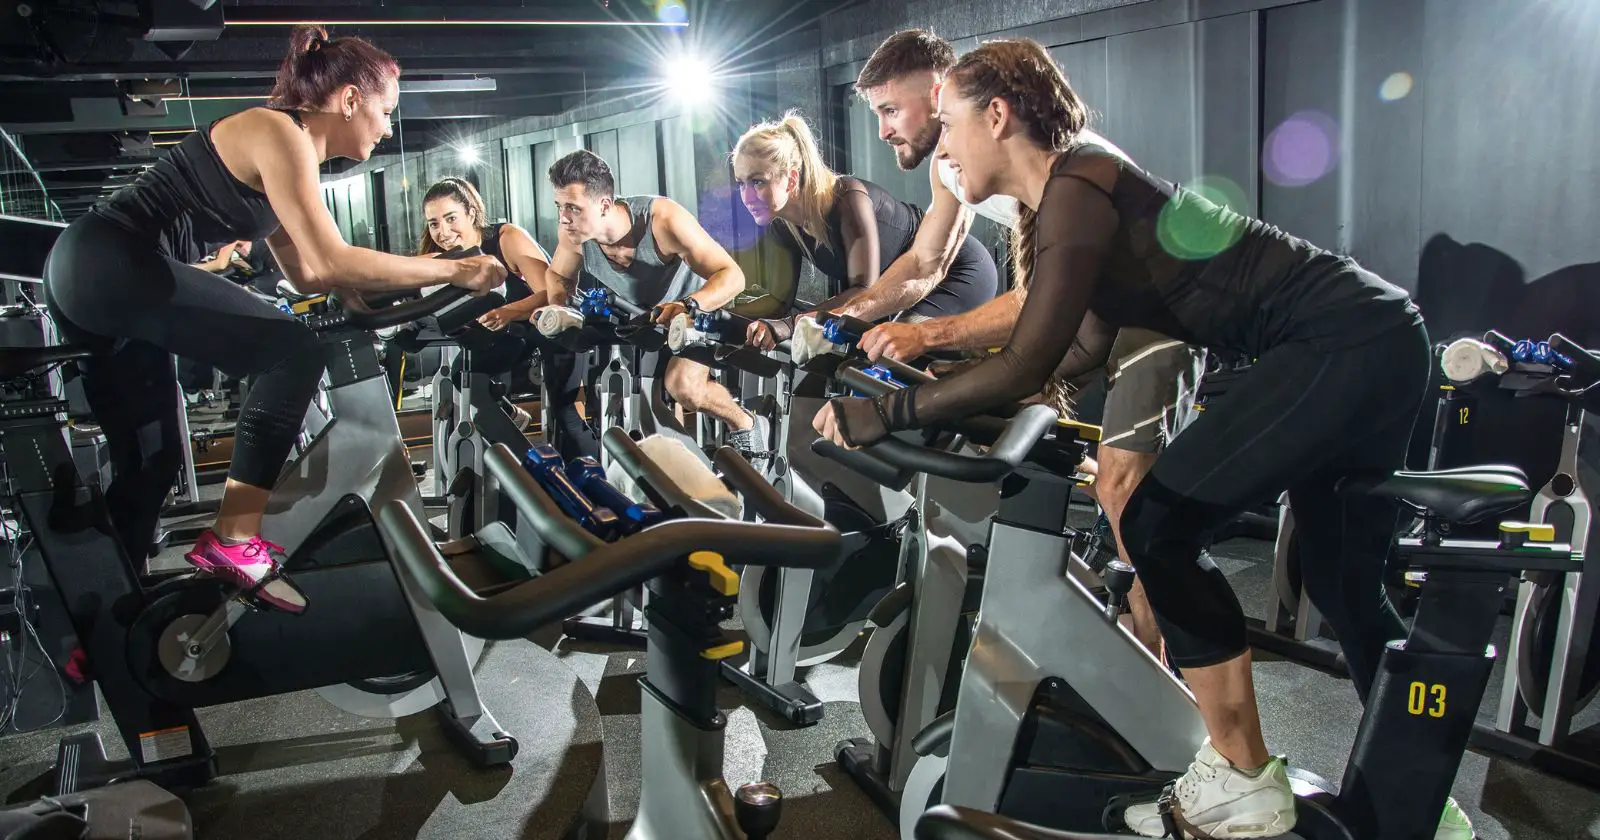 3 Reasons To Try Spinning